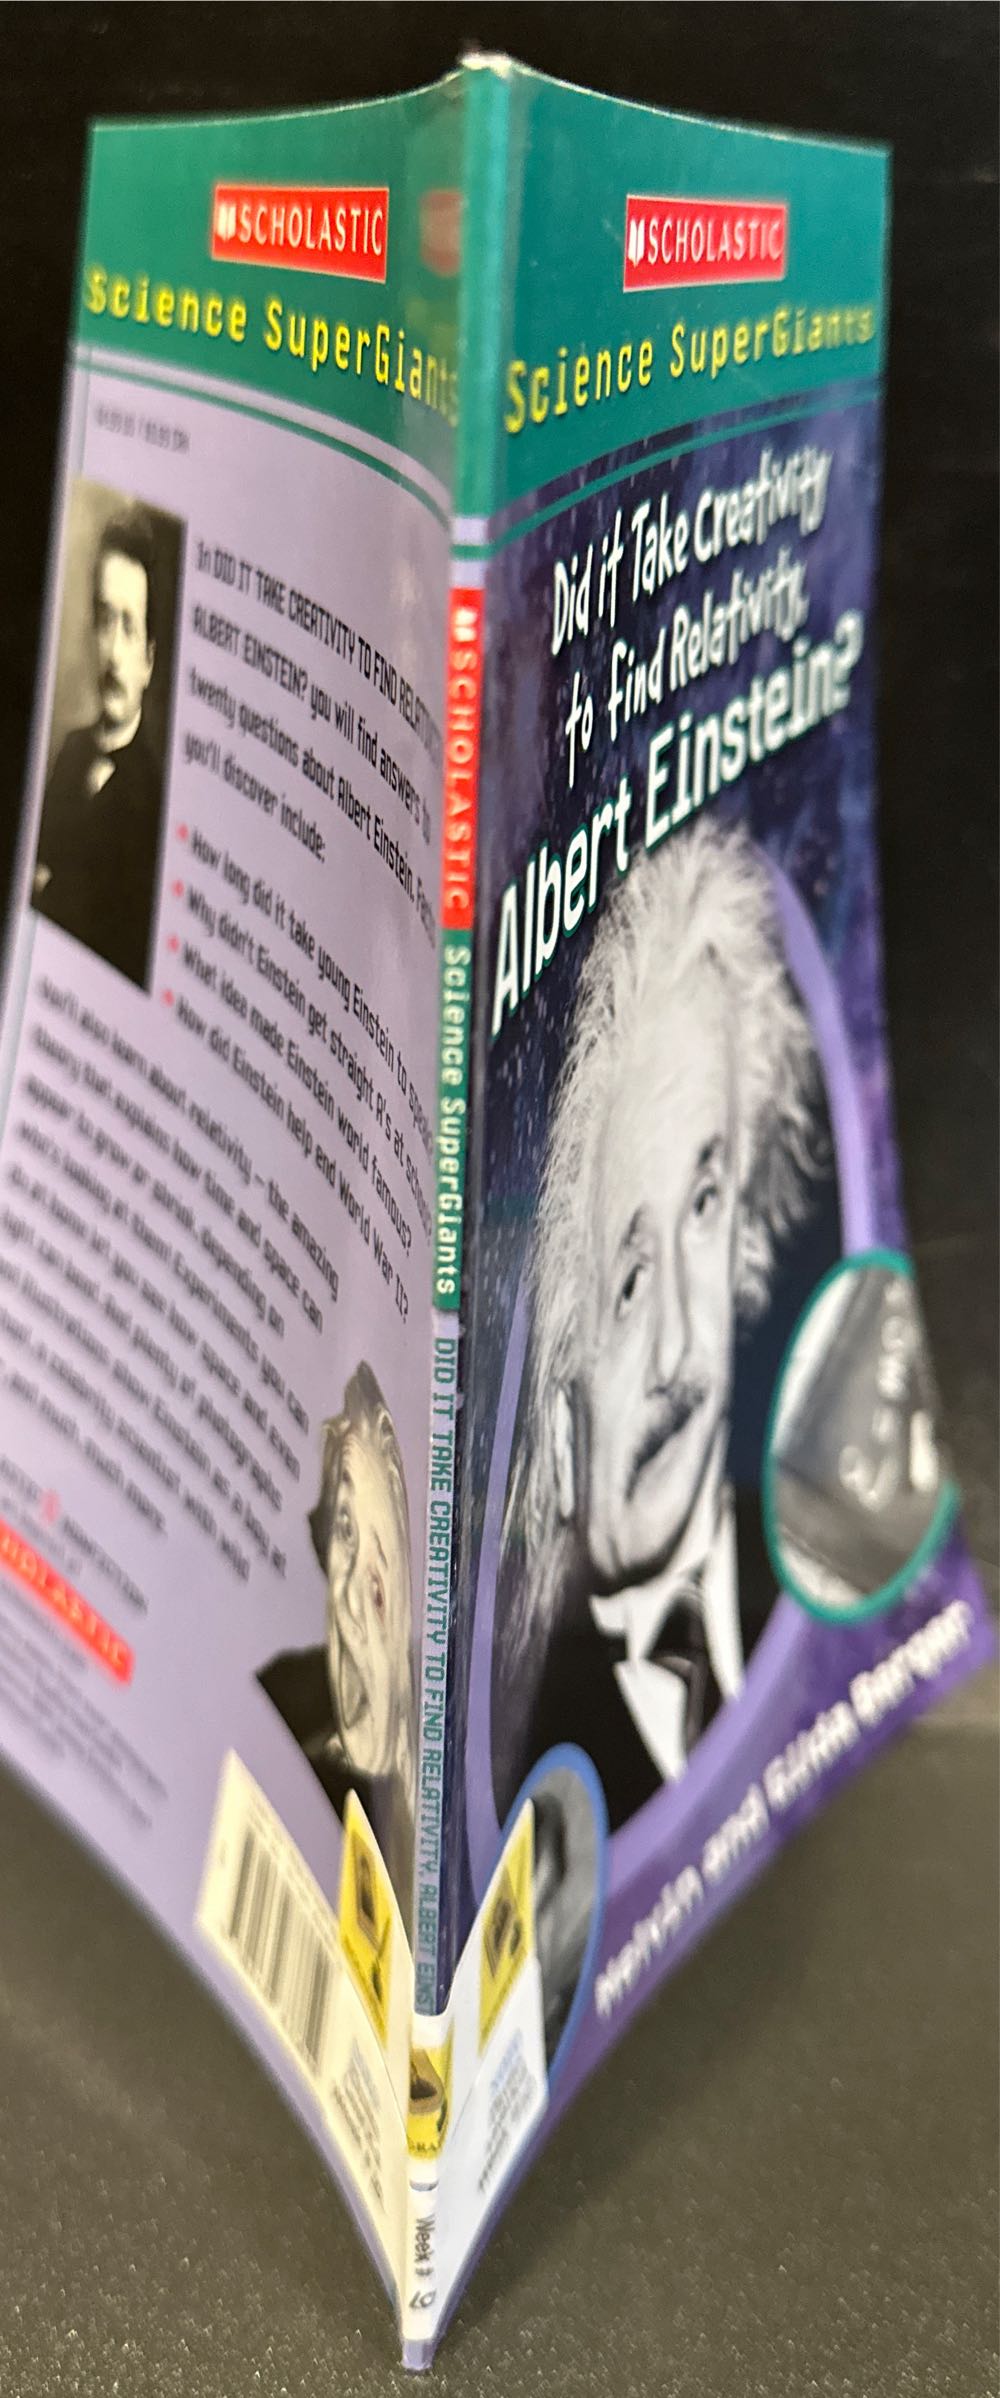 Did It Take Creativity To Find Relativity, Albert Einstein? - Melvin Berger (Scholastic Nonfiction - Paperback) book collectible [Barcode 9780439833844] - Main Image 2